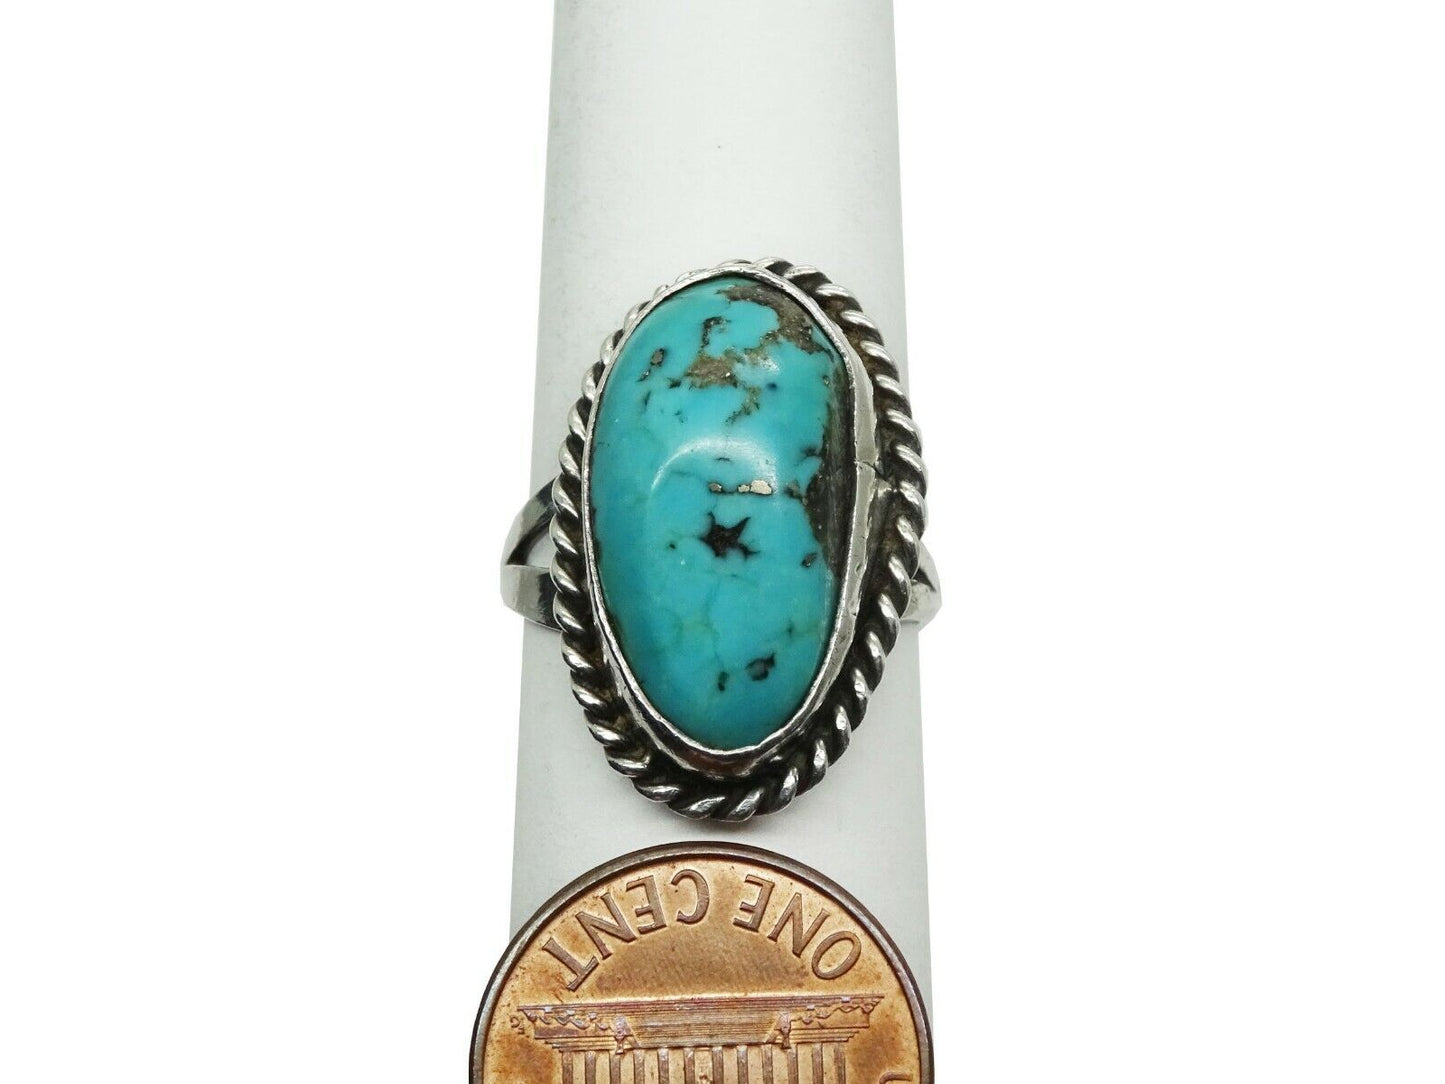 Southwestern Oval Turquoise Solitaire Split Shank Ring Sterling Silver Size 7.25